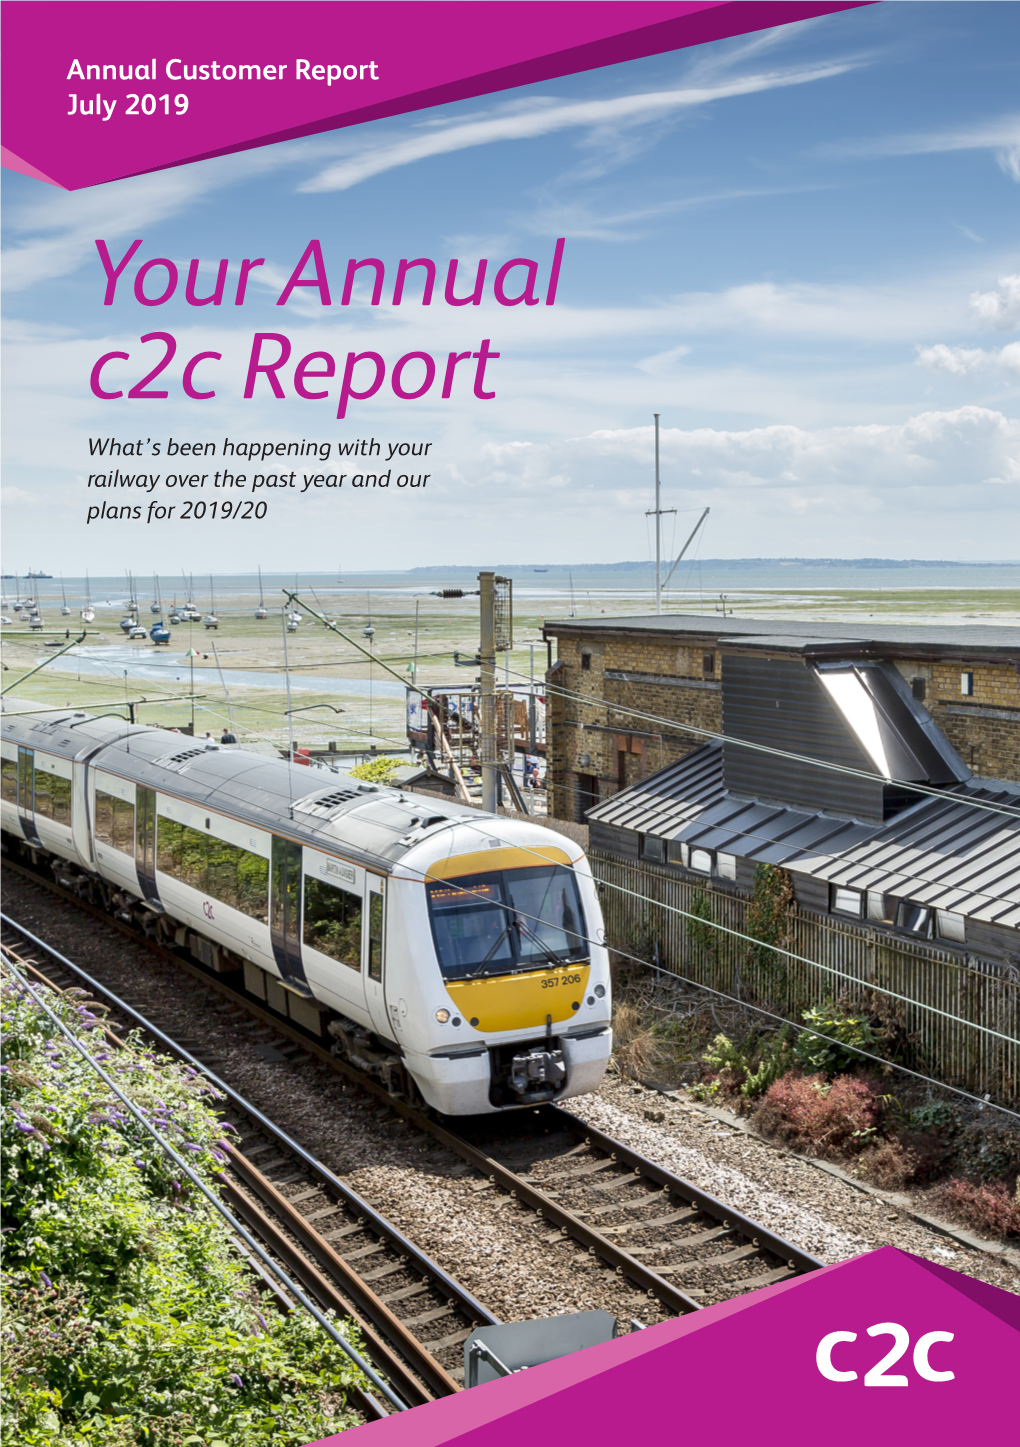 Your Annual C2c Report What’S Been Happening with Your Railway Over the Past Year and Our Plans for 2019/20 Contents a Message from Our Managing Director